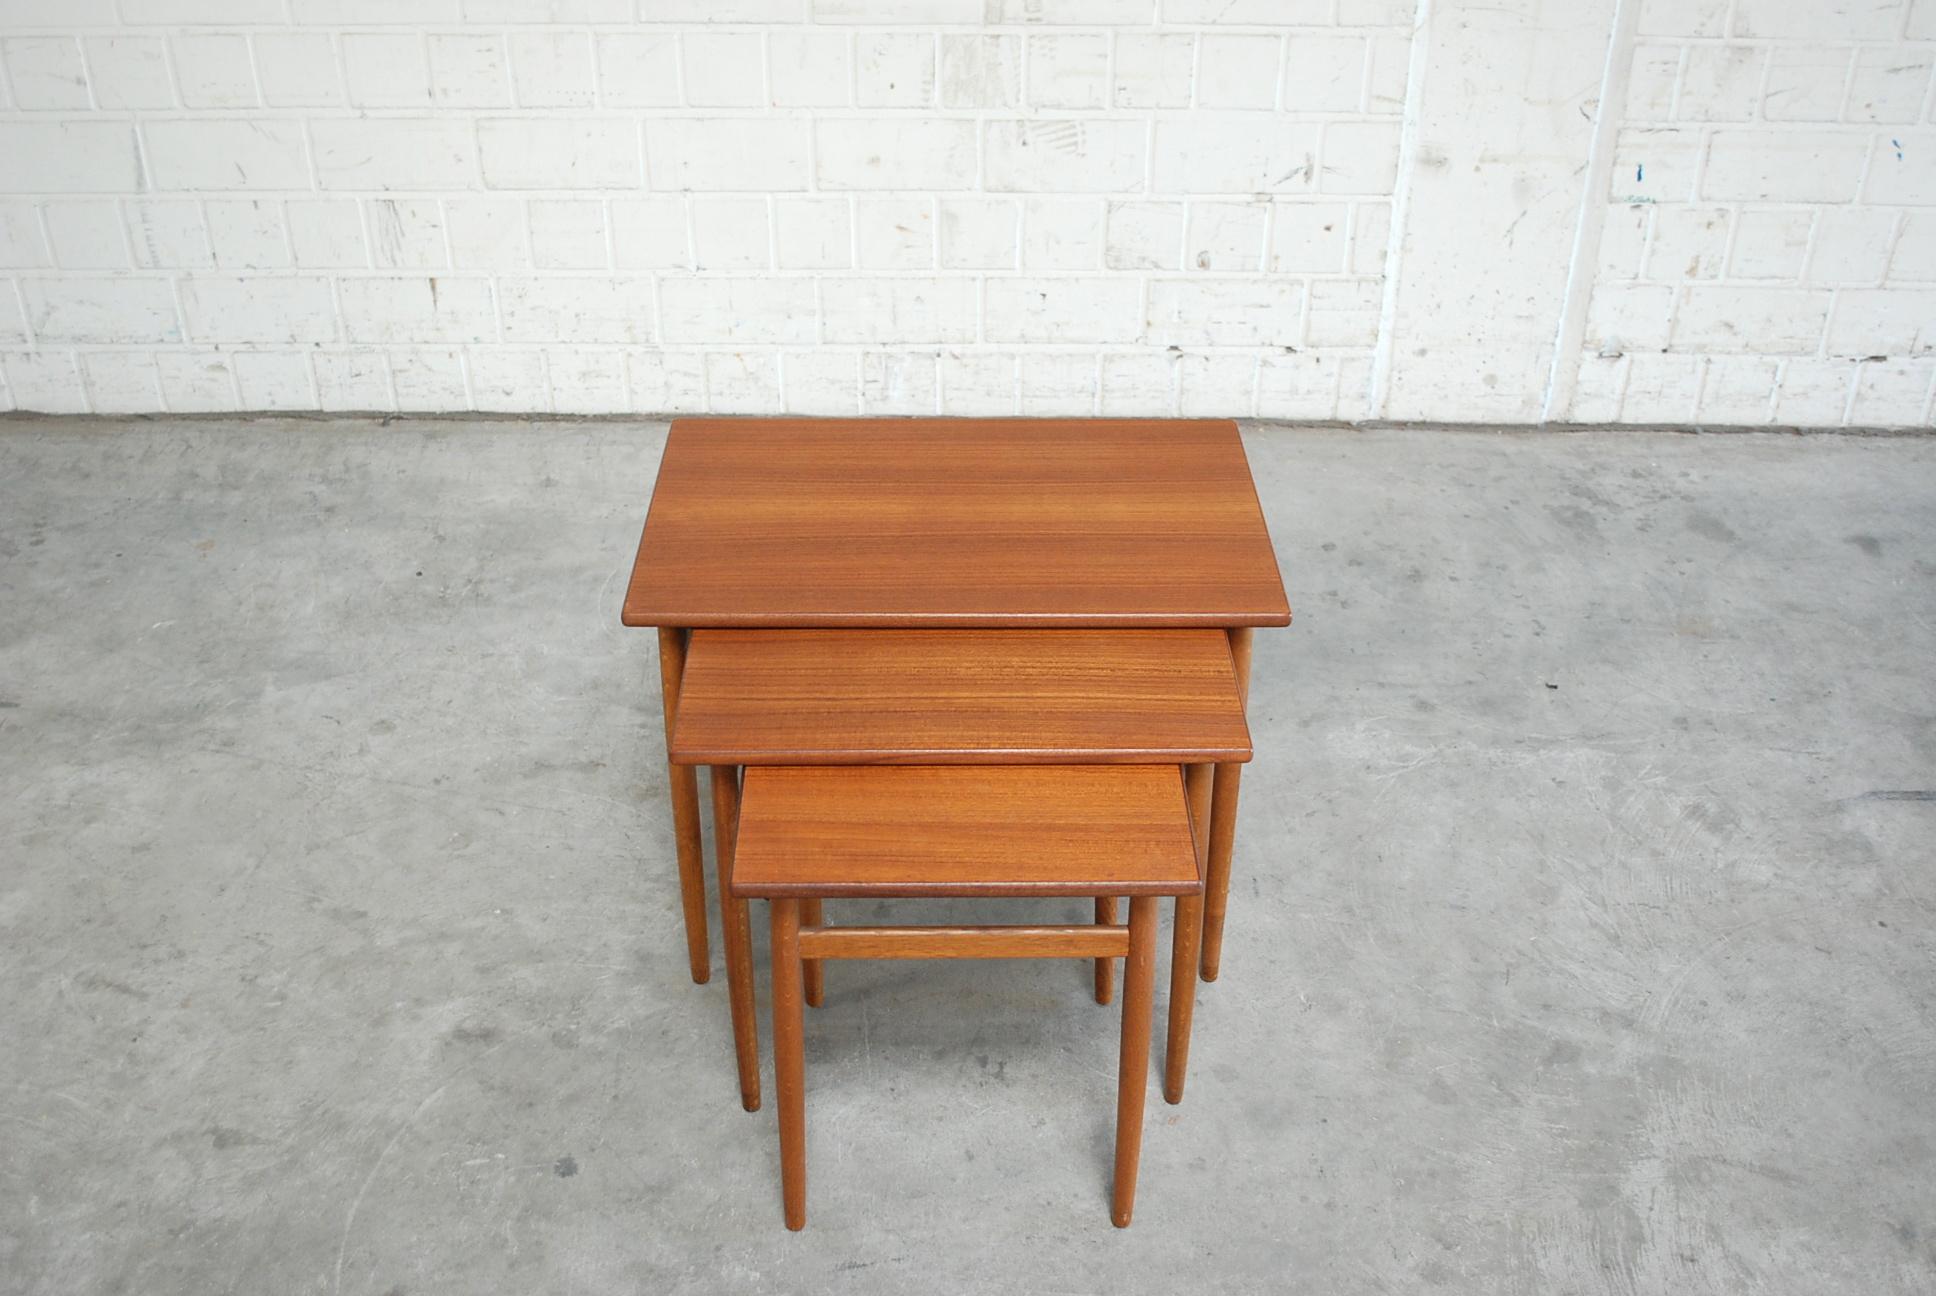 Nesting table set with 3 tables.
Oiled Teak wood. Design by Tove & Edvard Kindt-Larsen for swedish manufacture Seffle Mobelfabrik.
In very good condition.